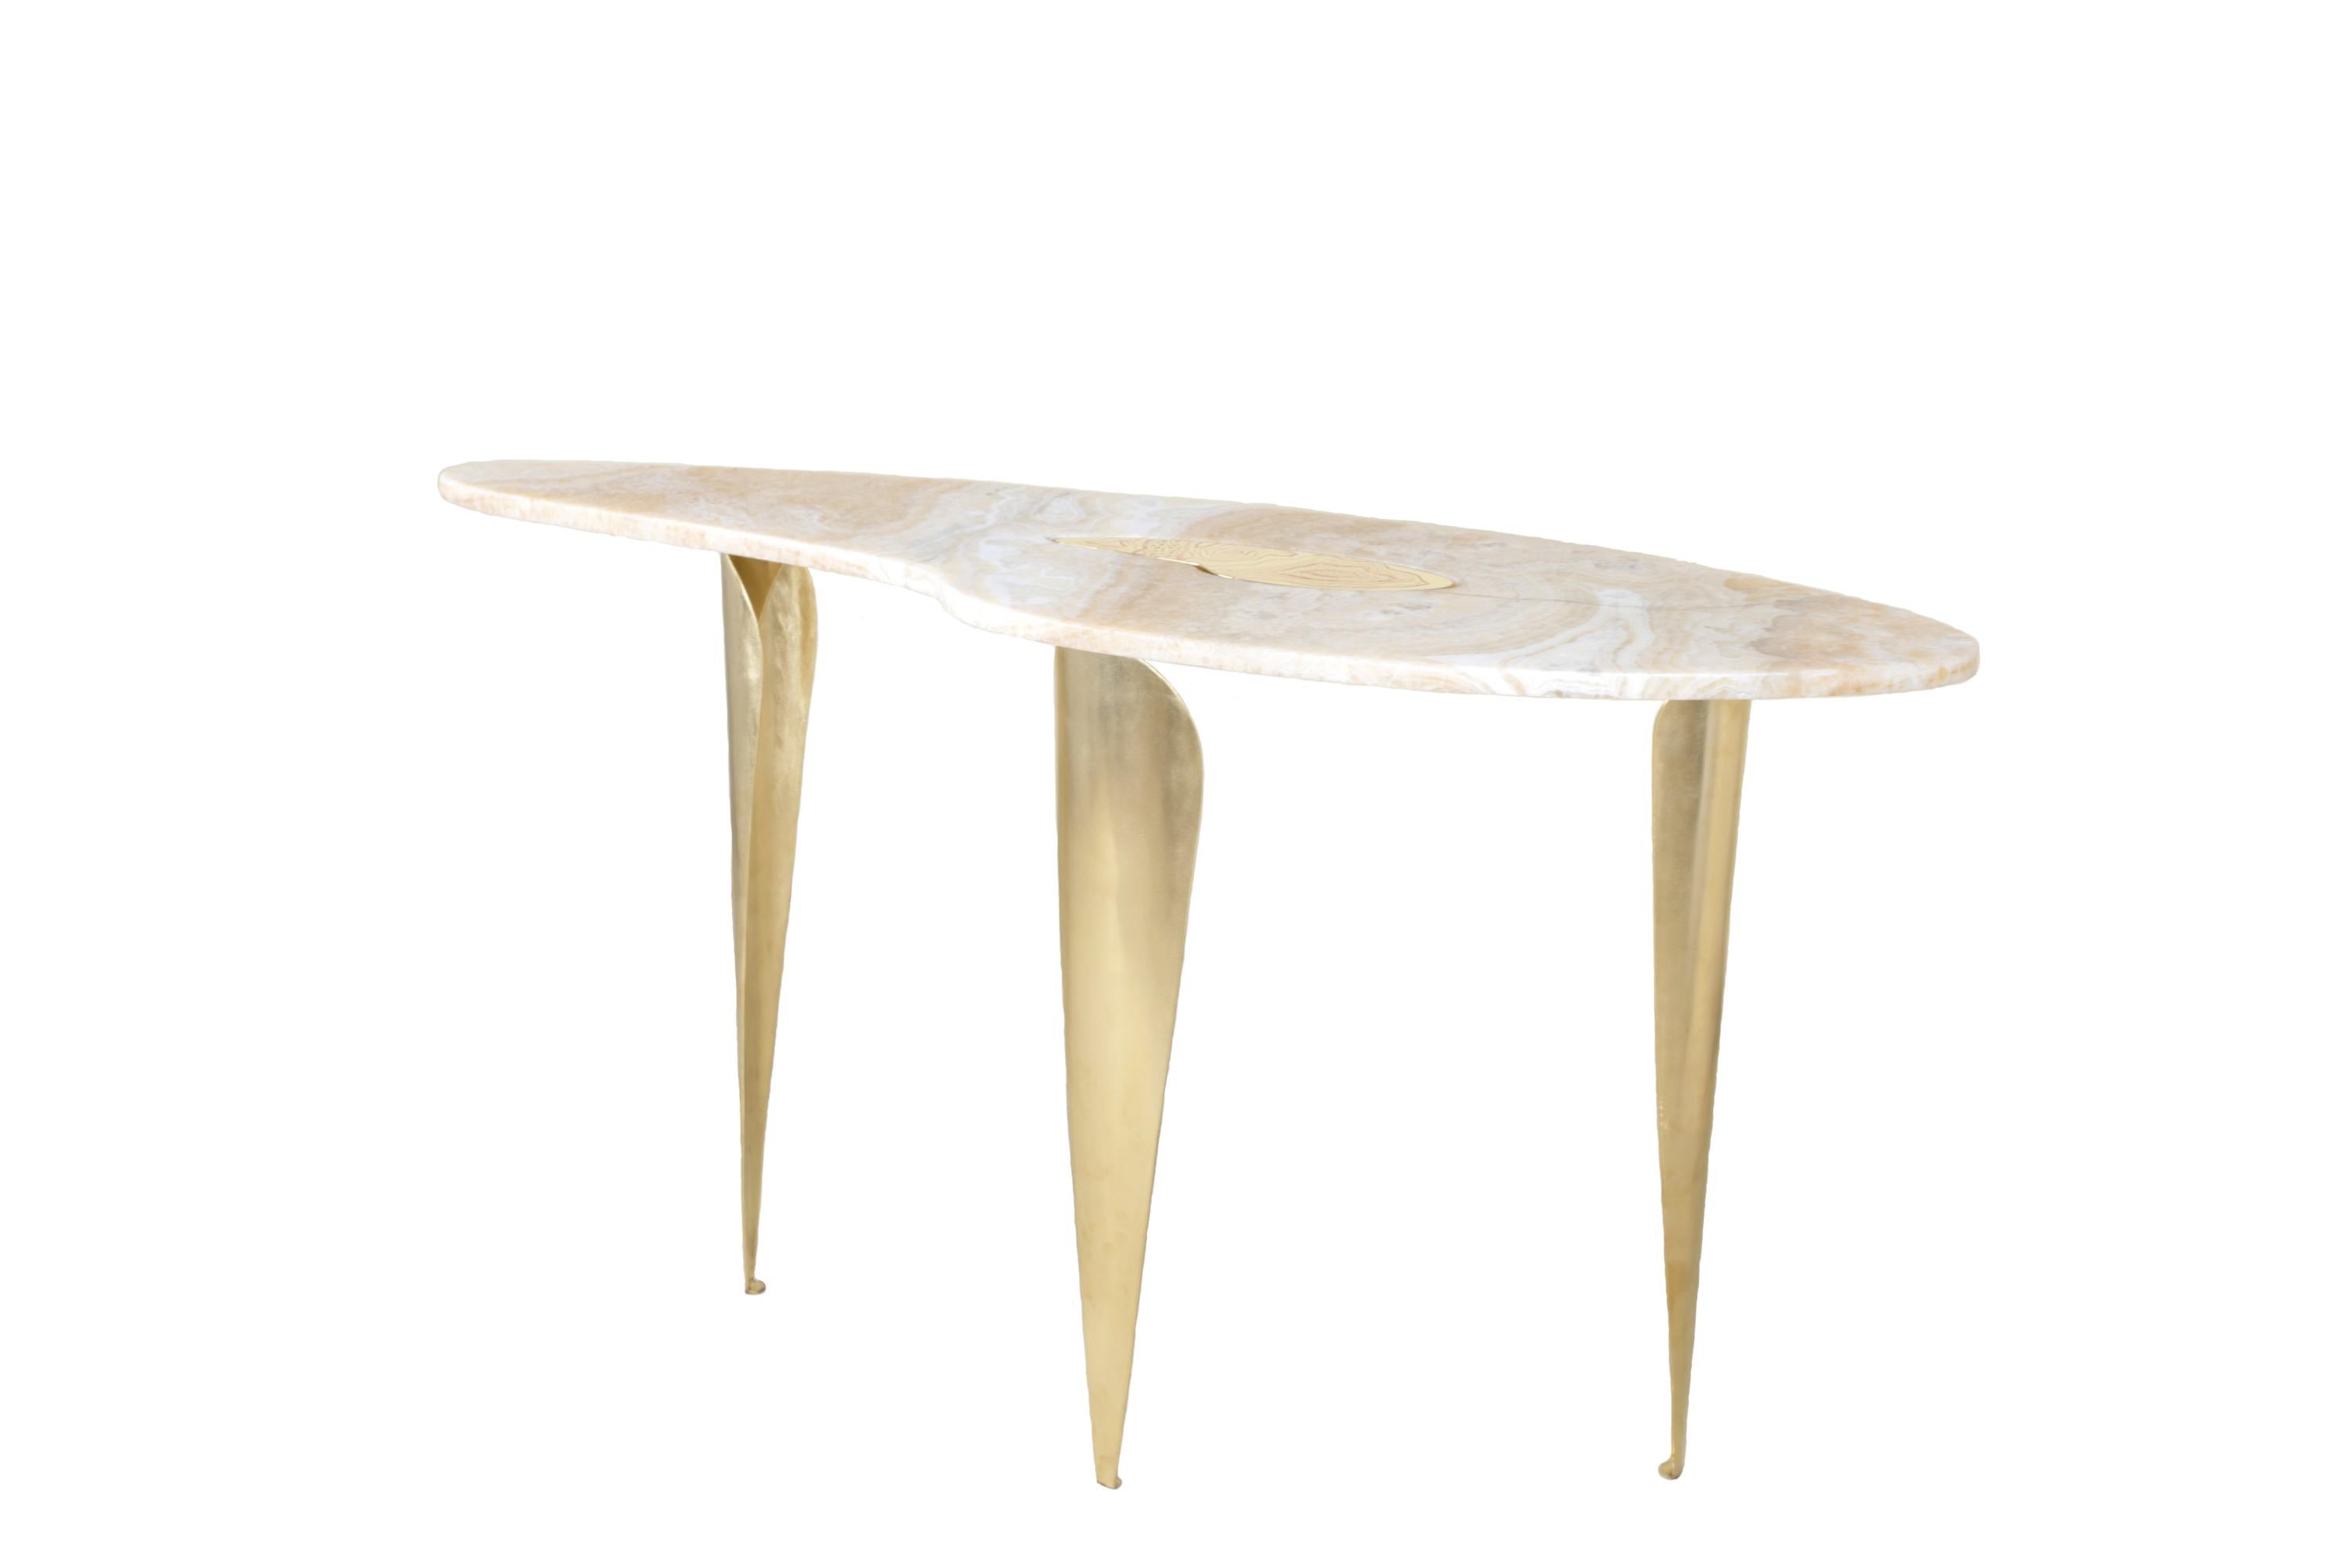 Onyx top with mirror polished brass center attacked with acid and brushed brass base.

The term folium comes from the ancient Greek phyllon (leaf). 
The artist wanted to pay homage to nature by representing the physical and functional fusion of the